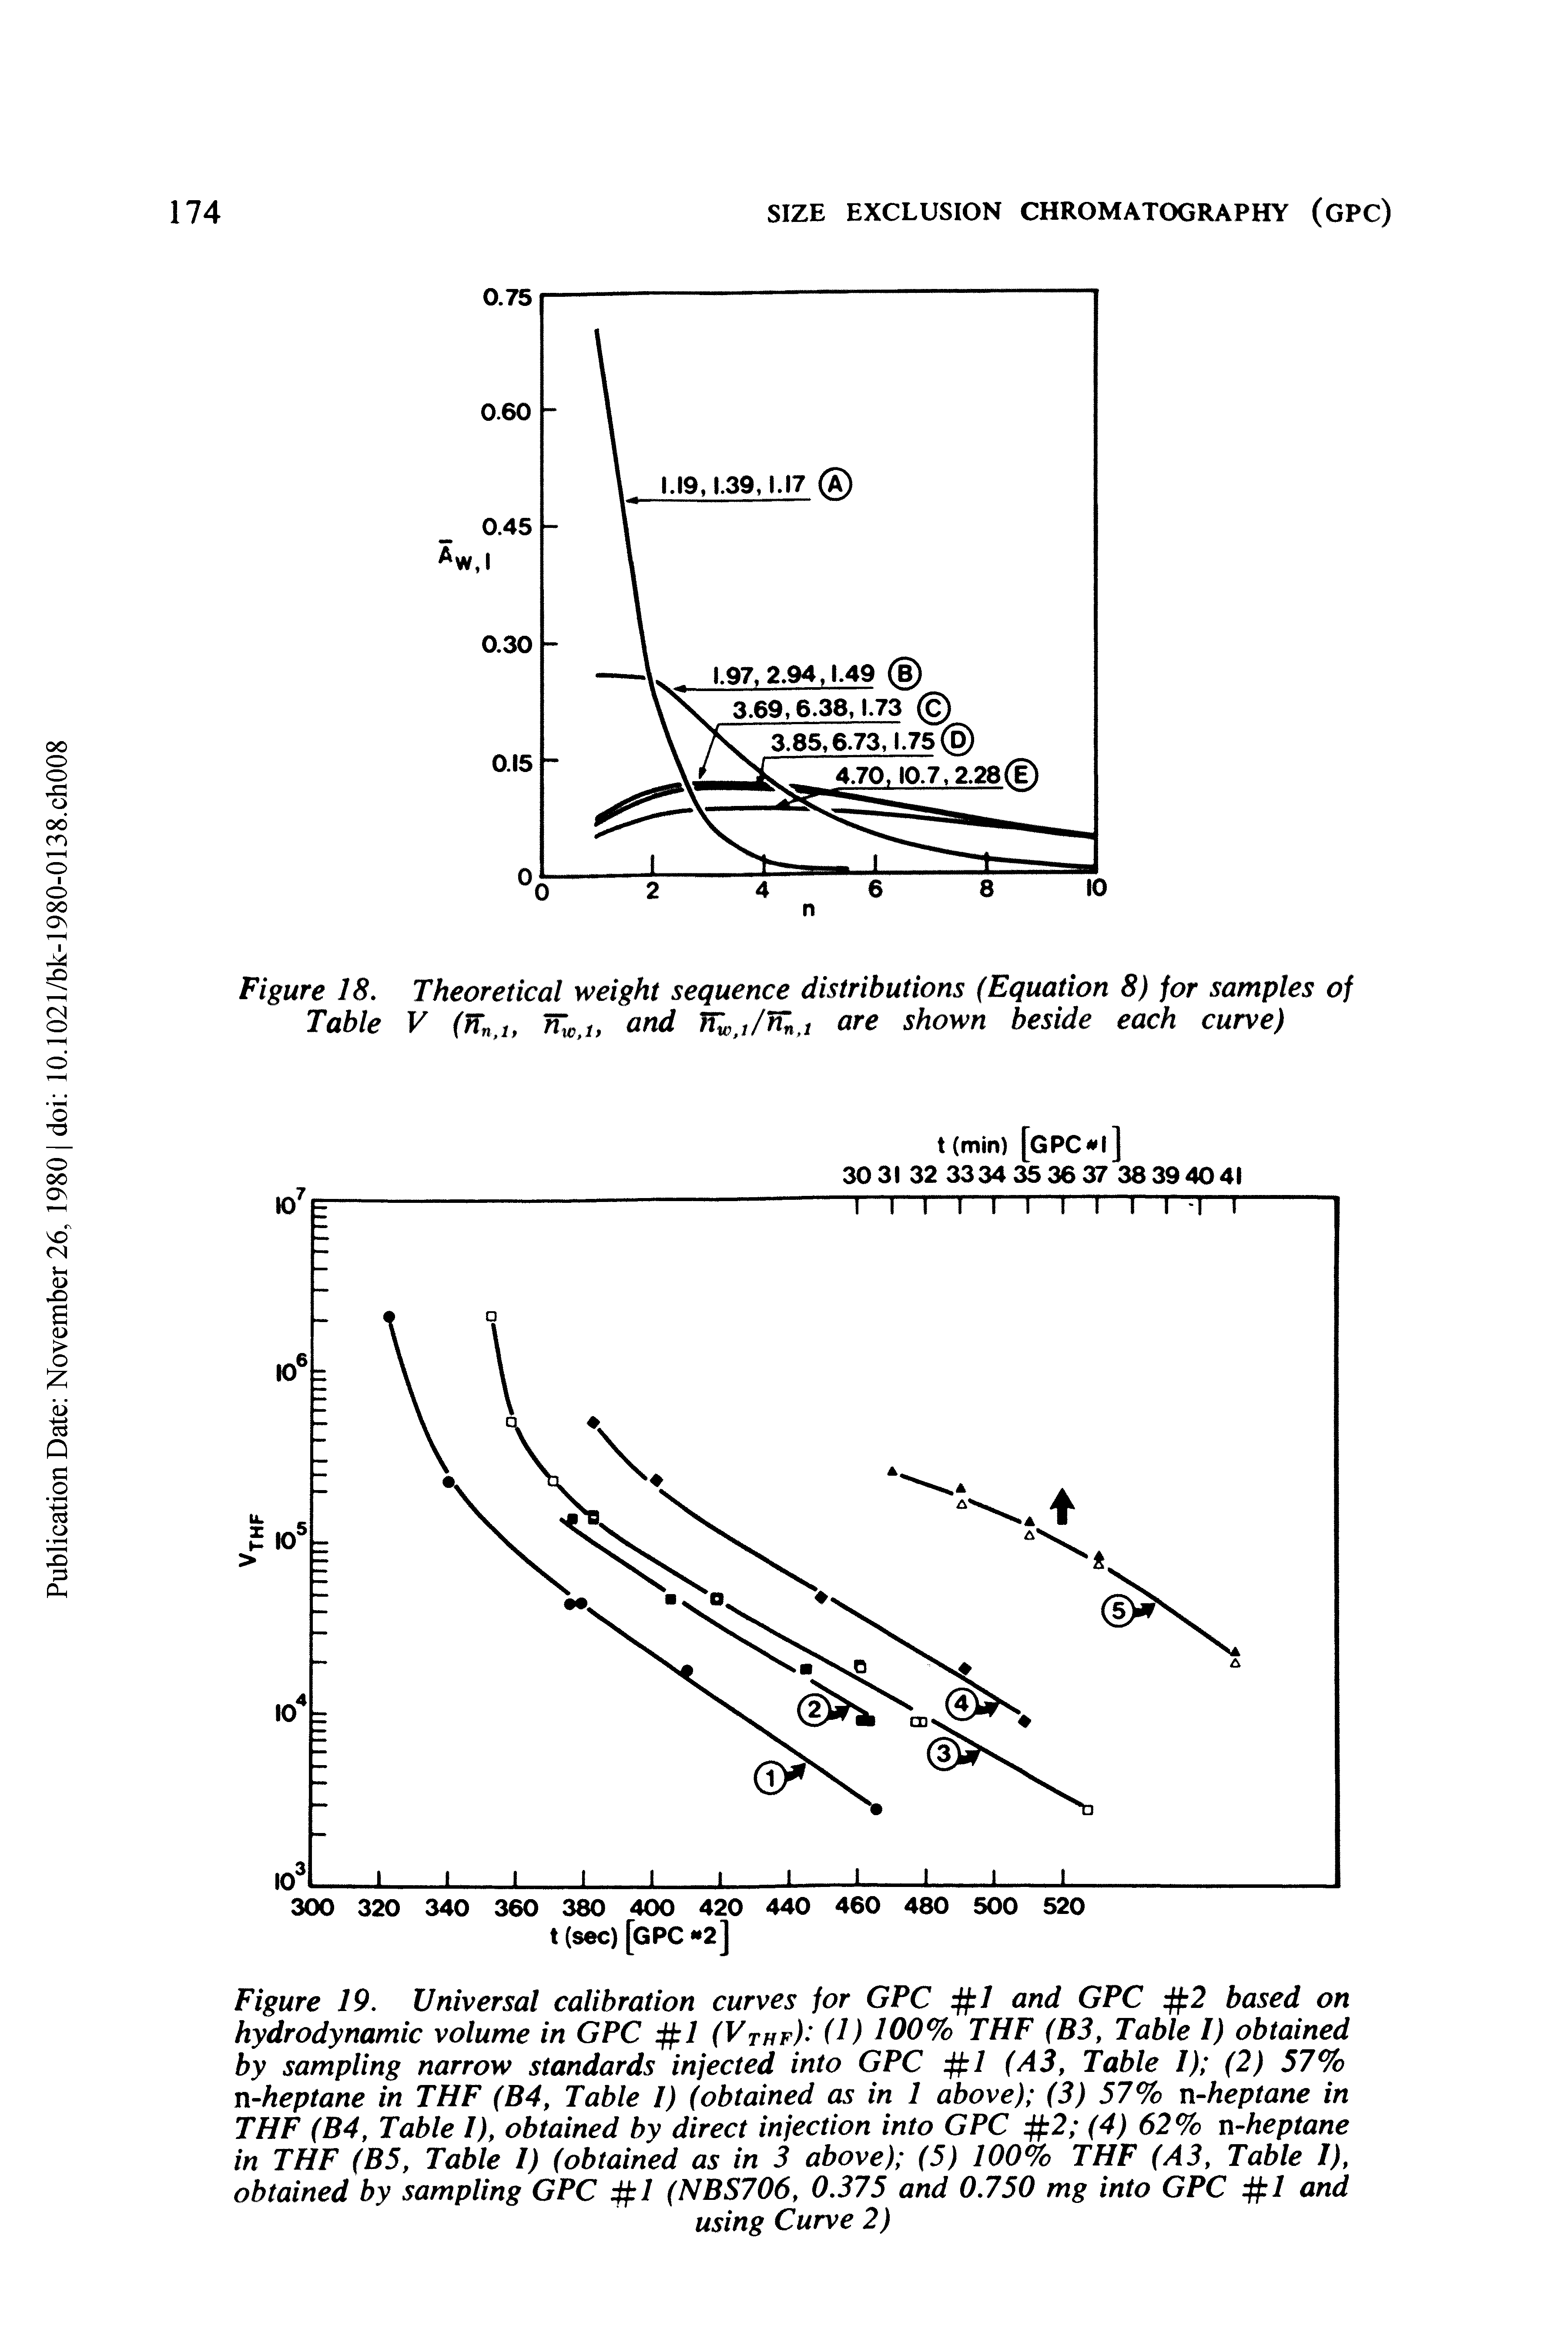 Figure 18. Theoretical weight sequence distributions (Equation 8) for samples of Table V (Wn,i, and W j/Wn,i are shown beside each curve)...